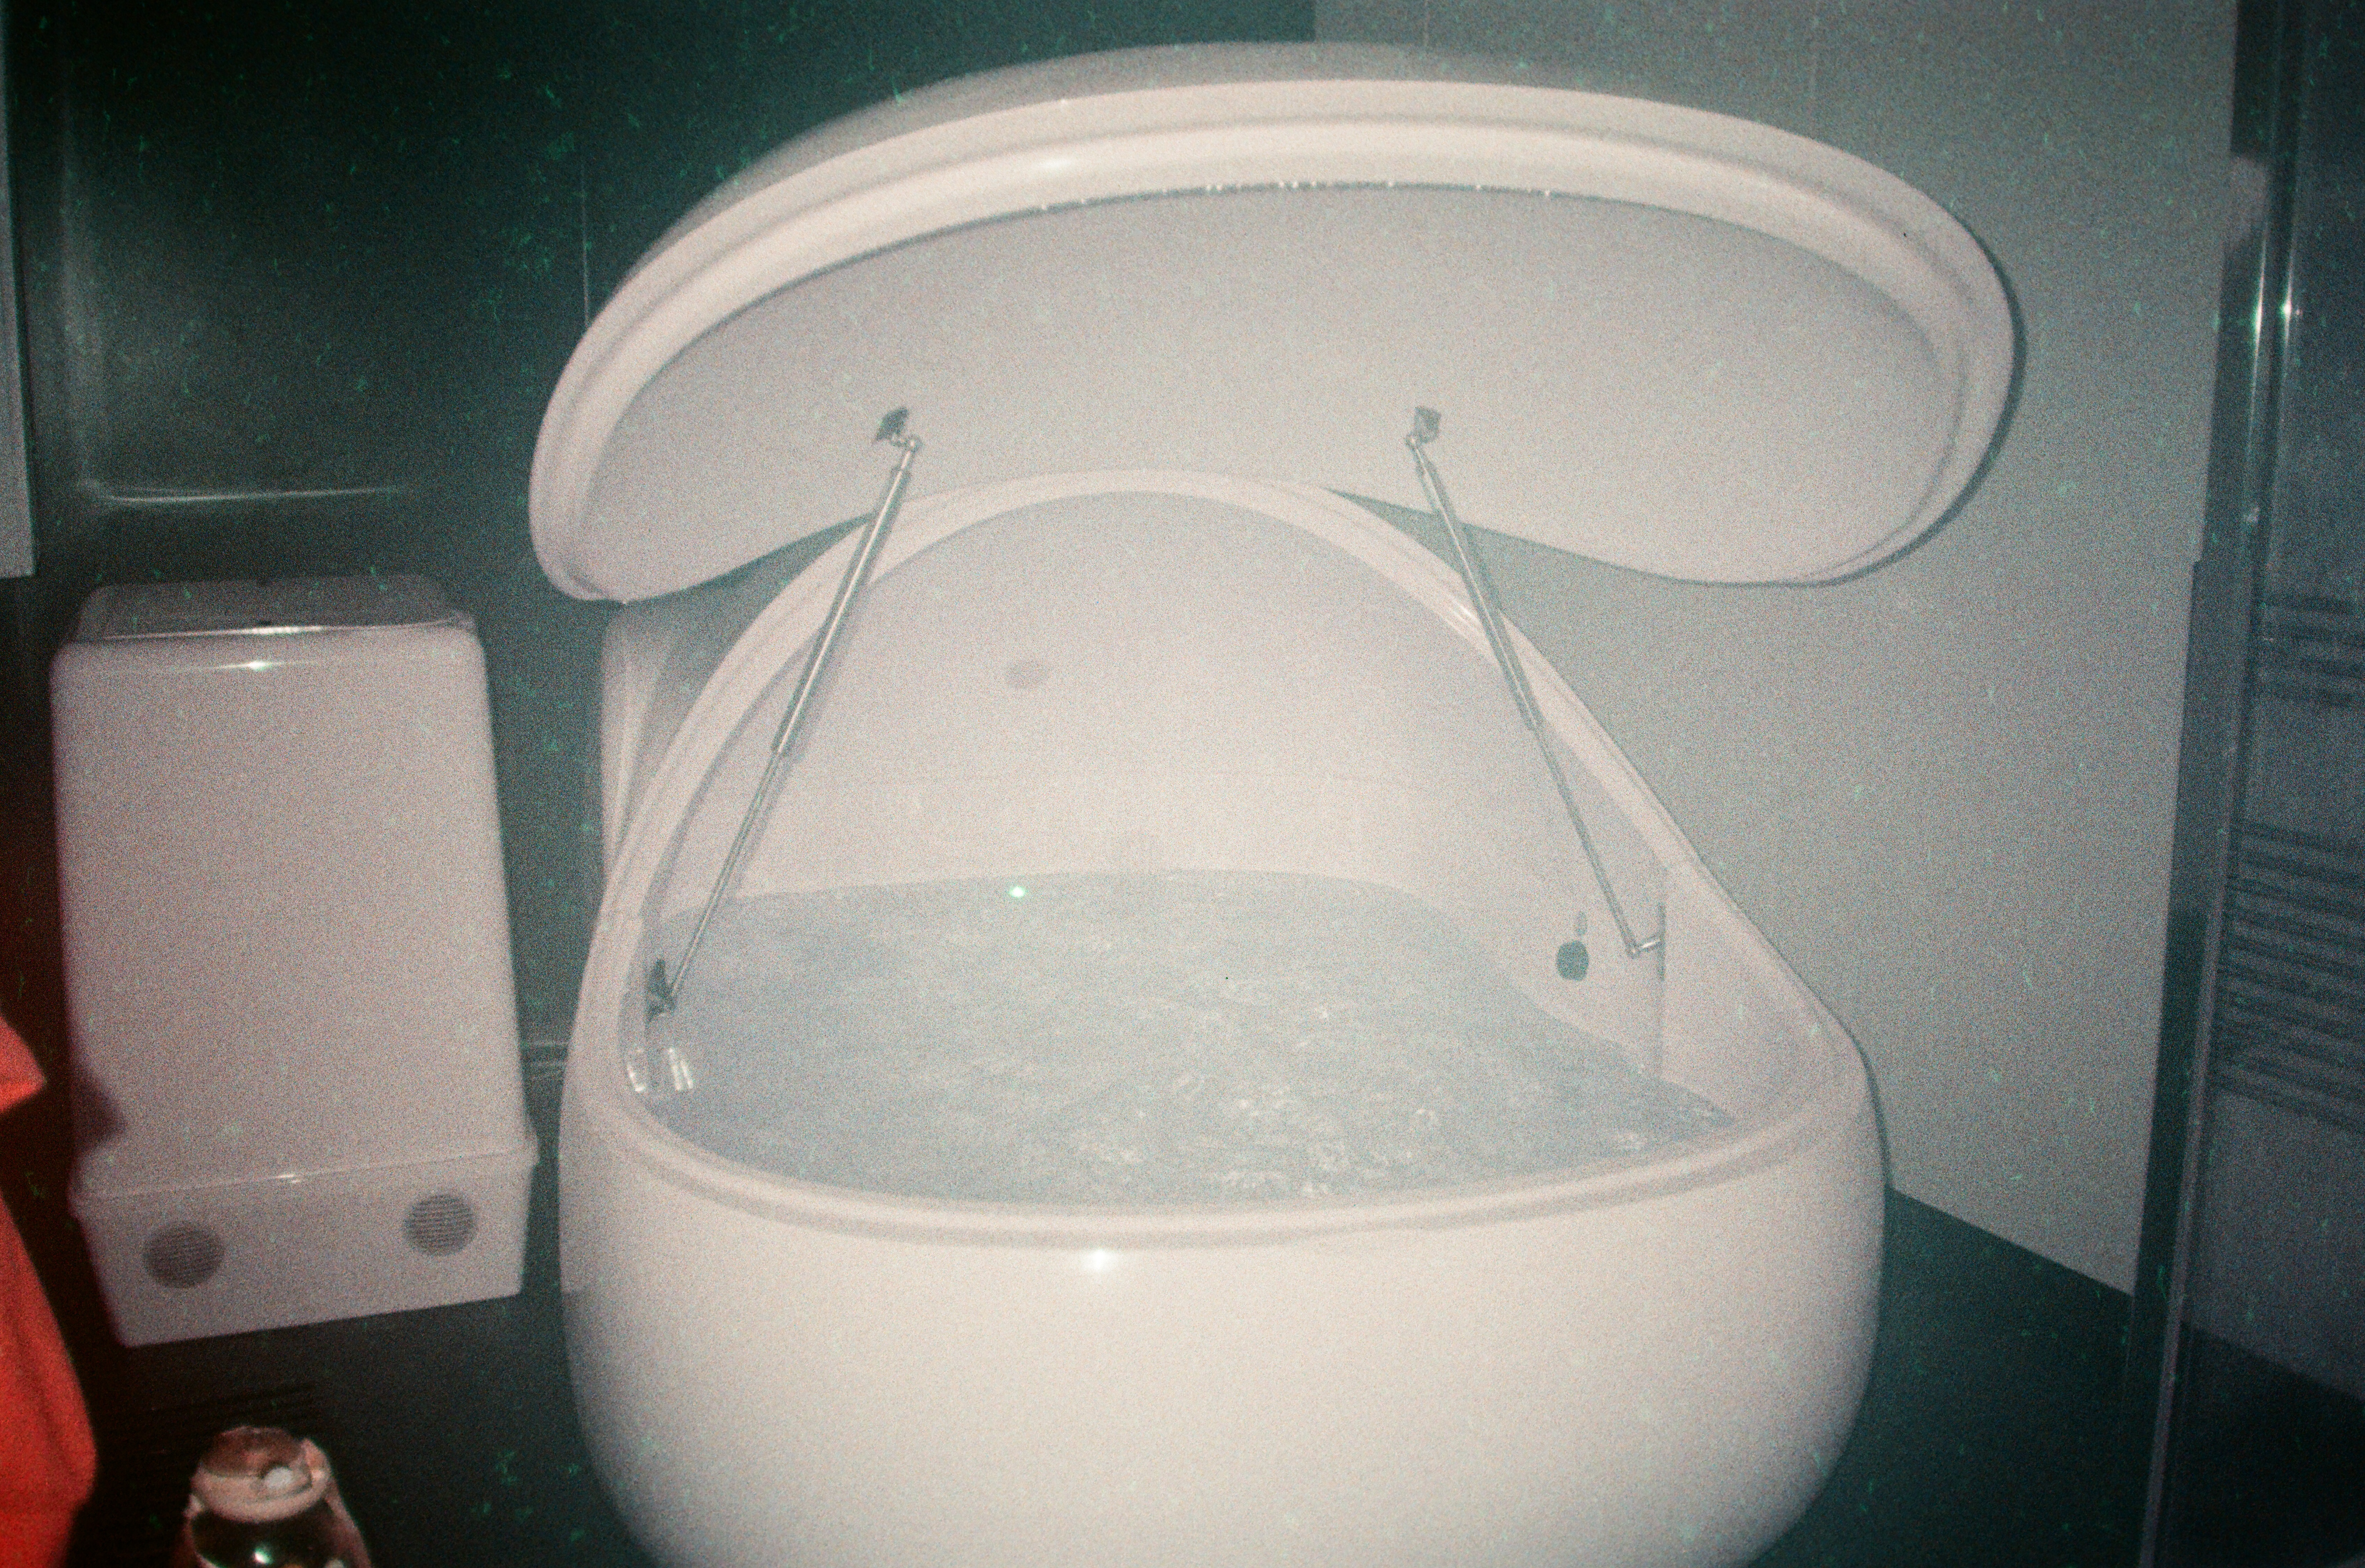 a grainy film photography of a big smooth white floatation tank that is open and showing clear water inside